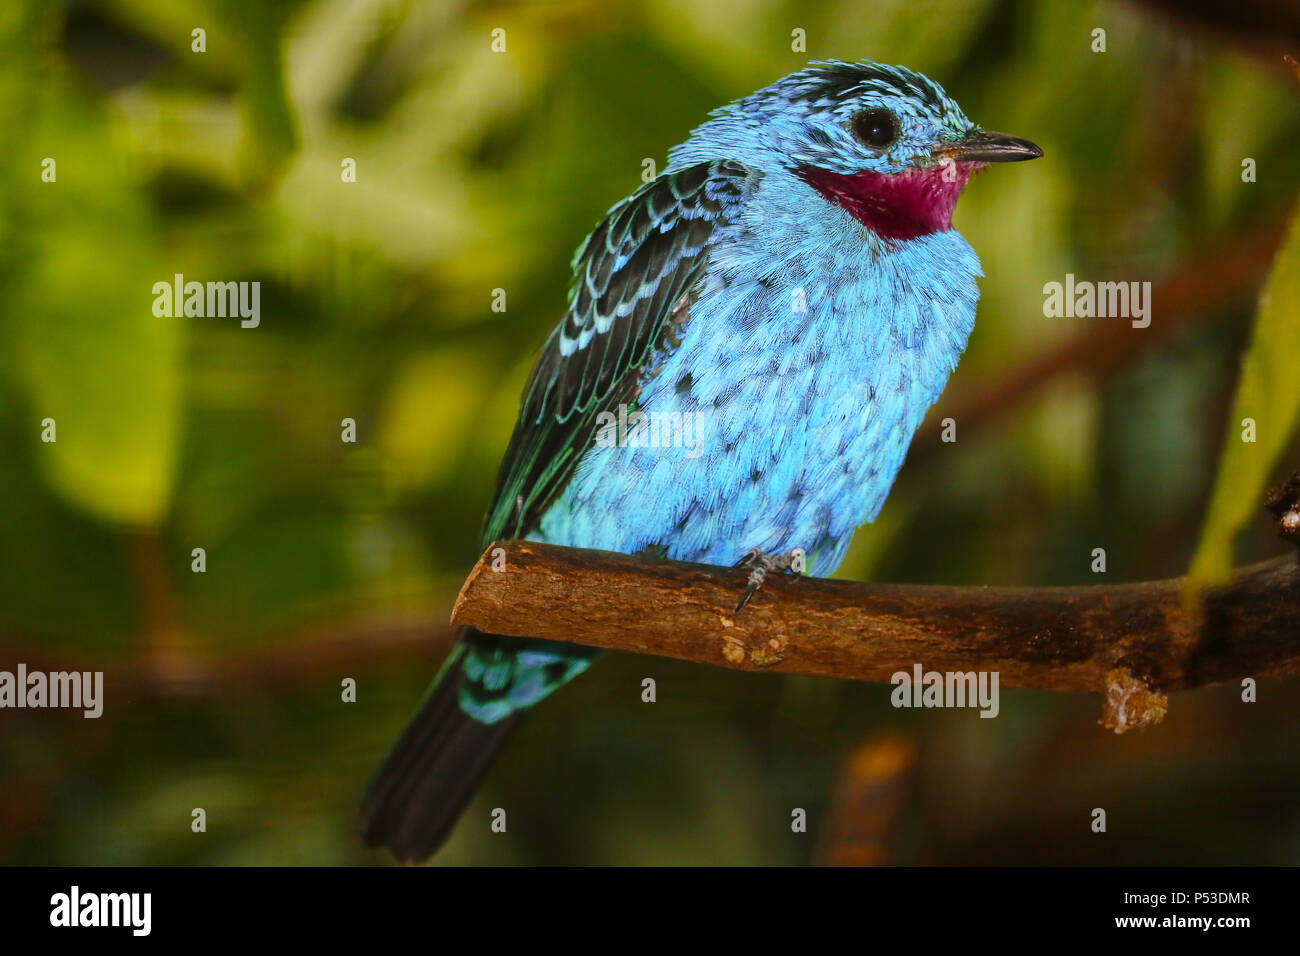 Male turqouise-blue spangled cotinga cayana with a wine-red throat perching on a branch Stock Photo